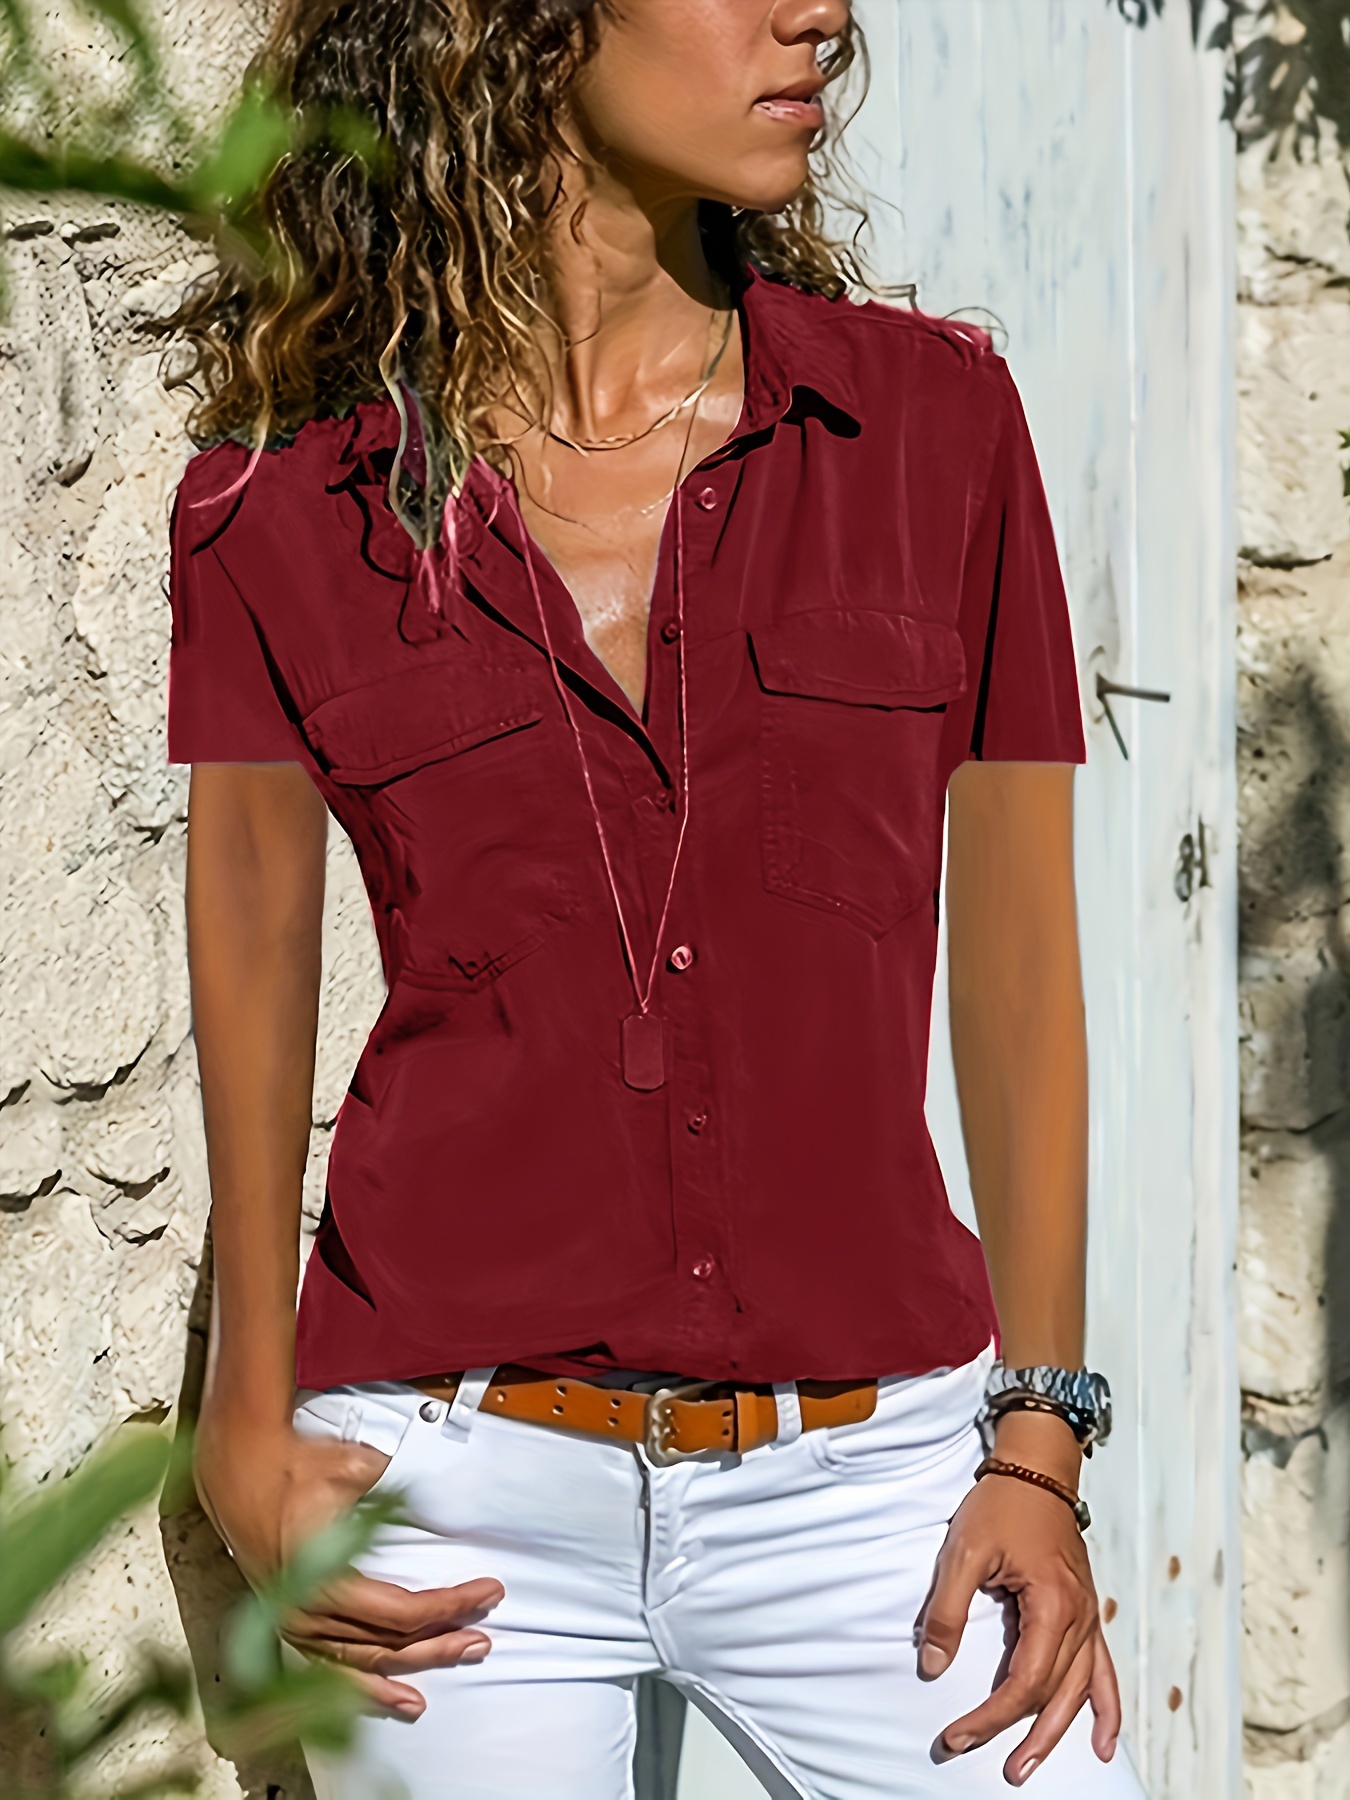  Womens Tops, Short Sleeve Casual Summer Top Solid